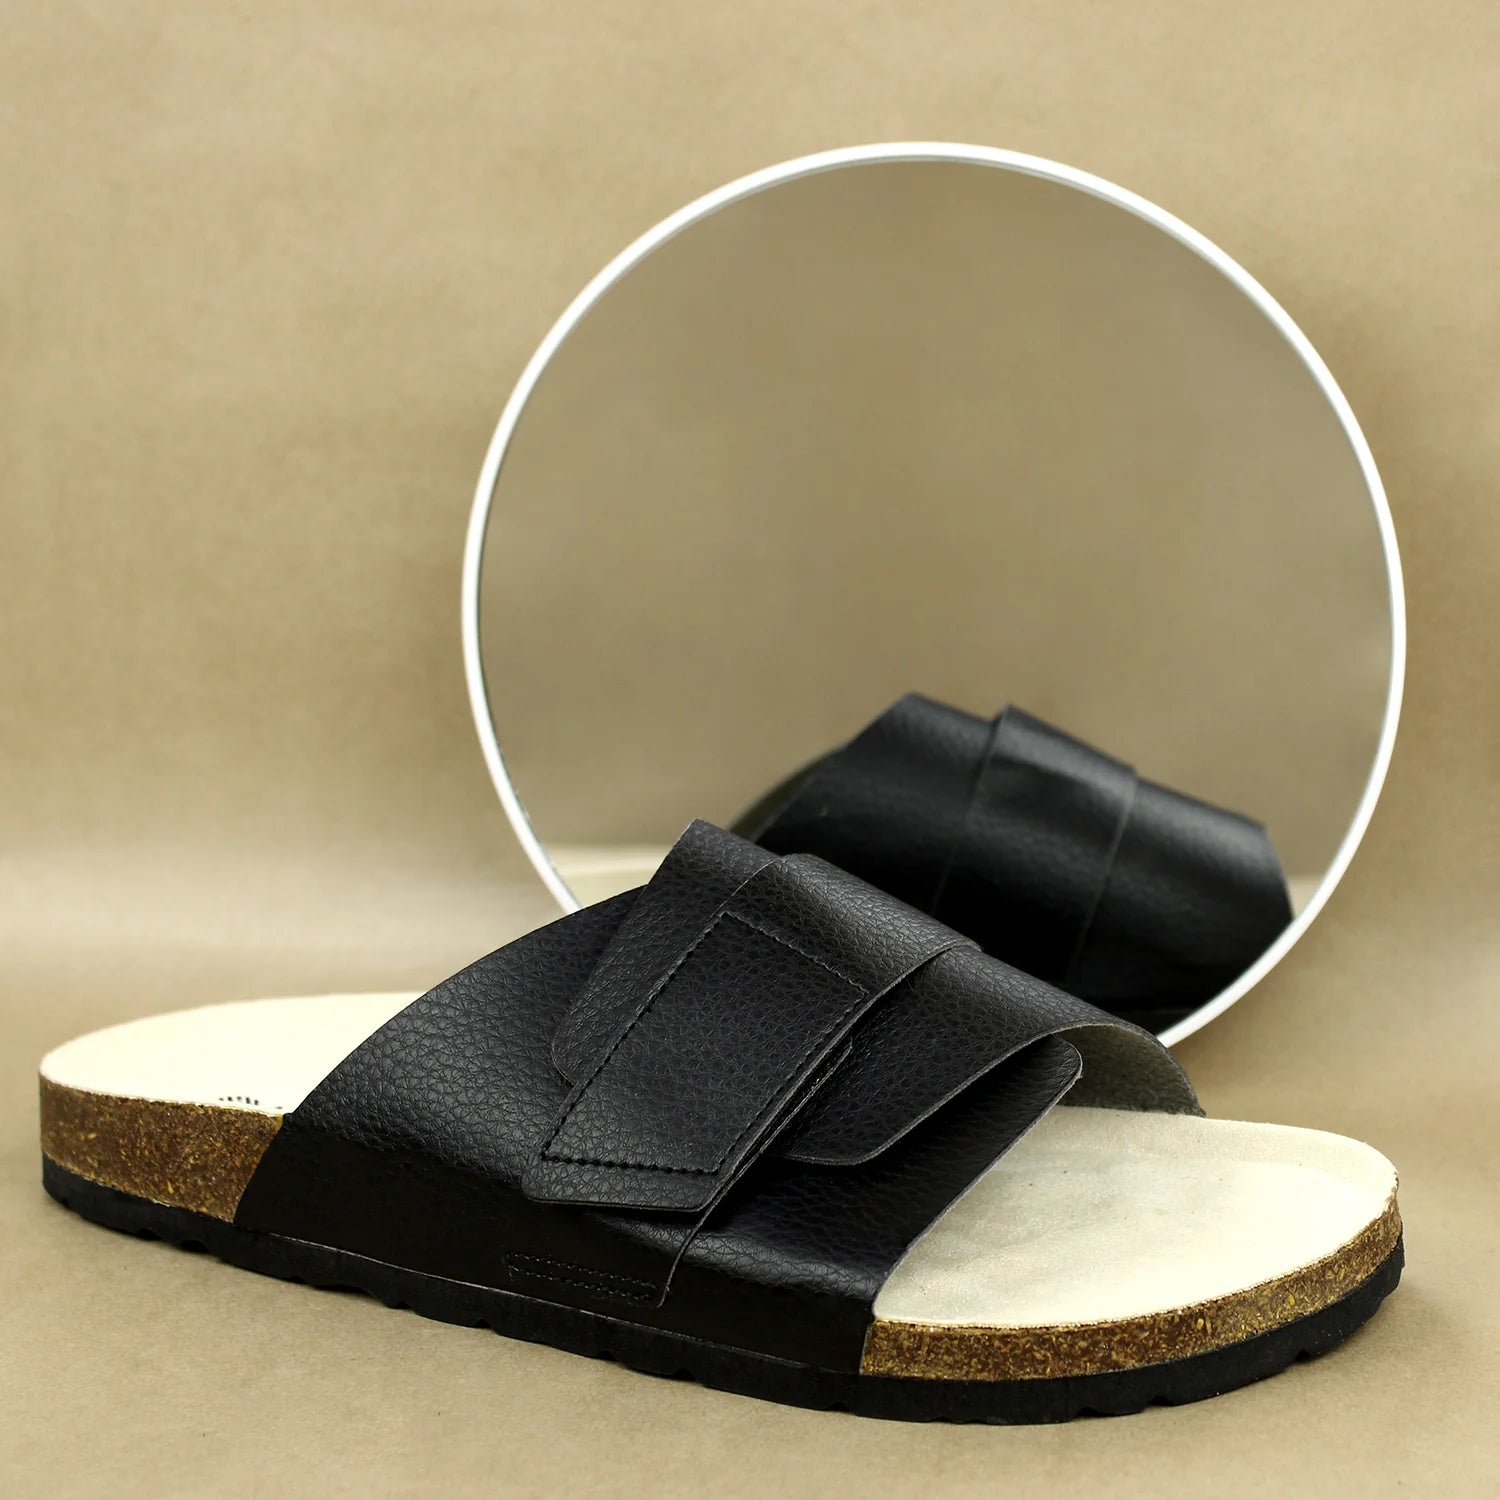 Black cork sandals for men, ideal for office wear and daily use